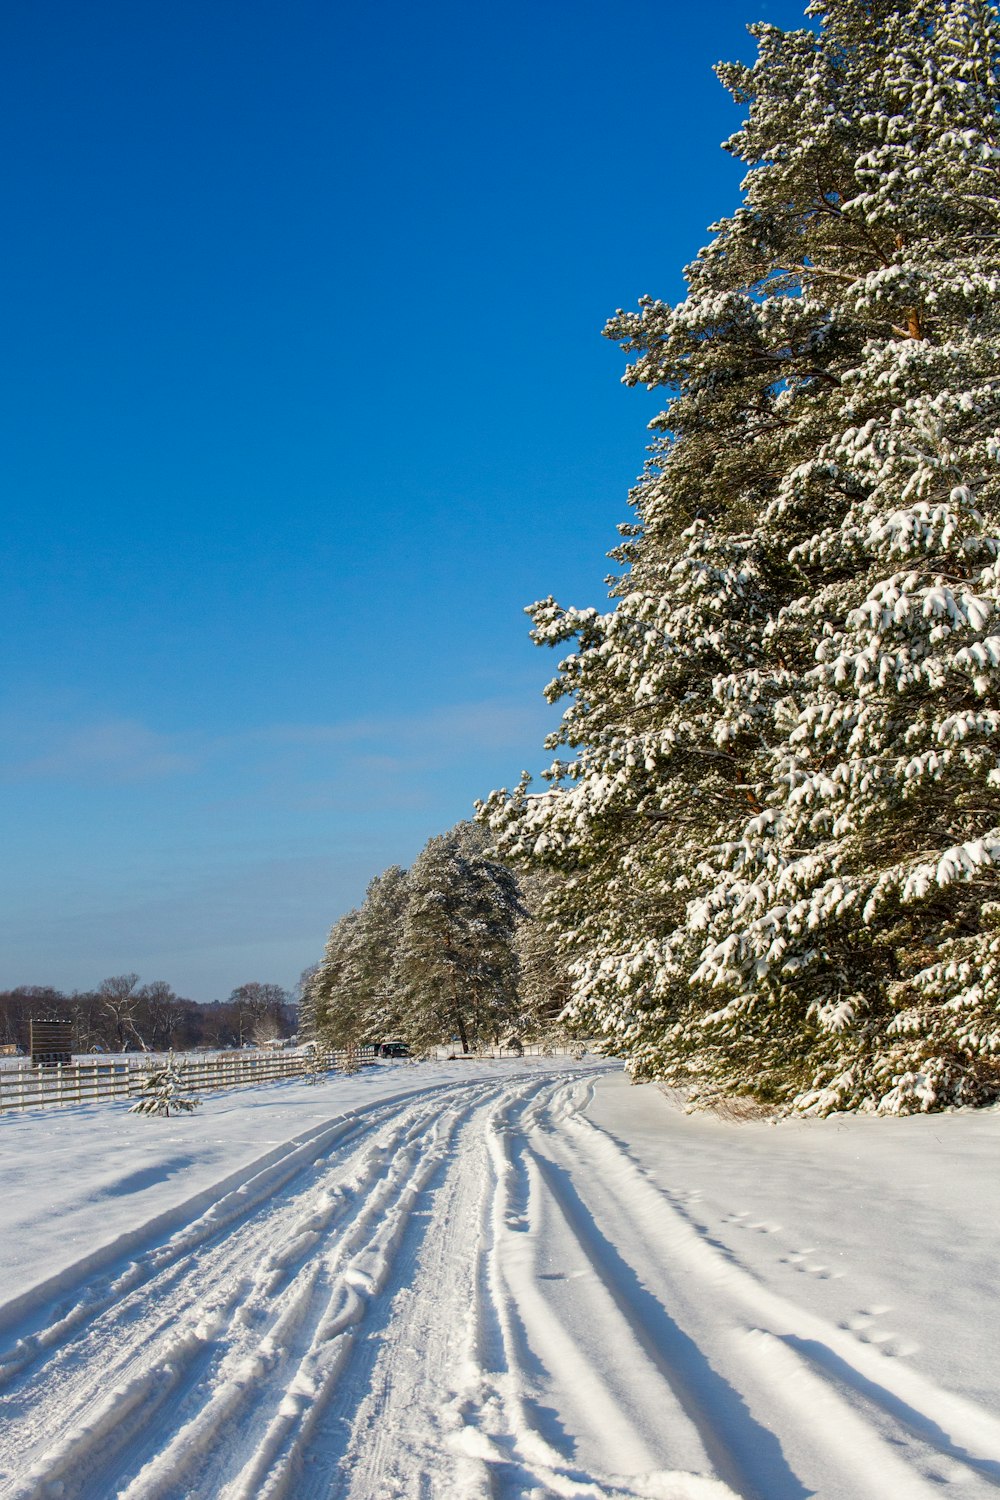 a snow covered road next to a large pine tree